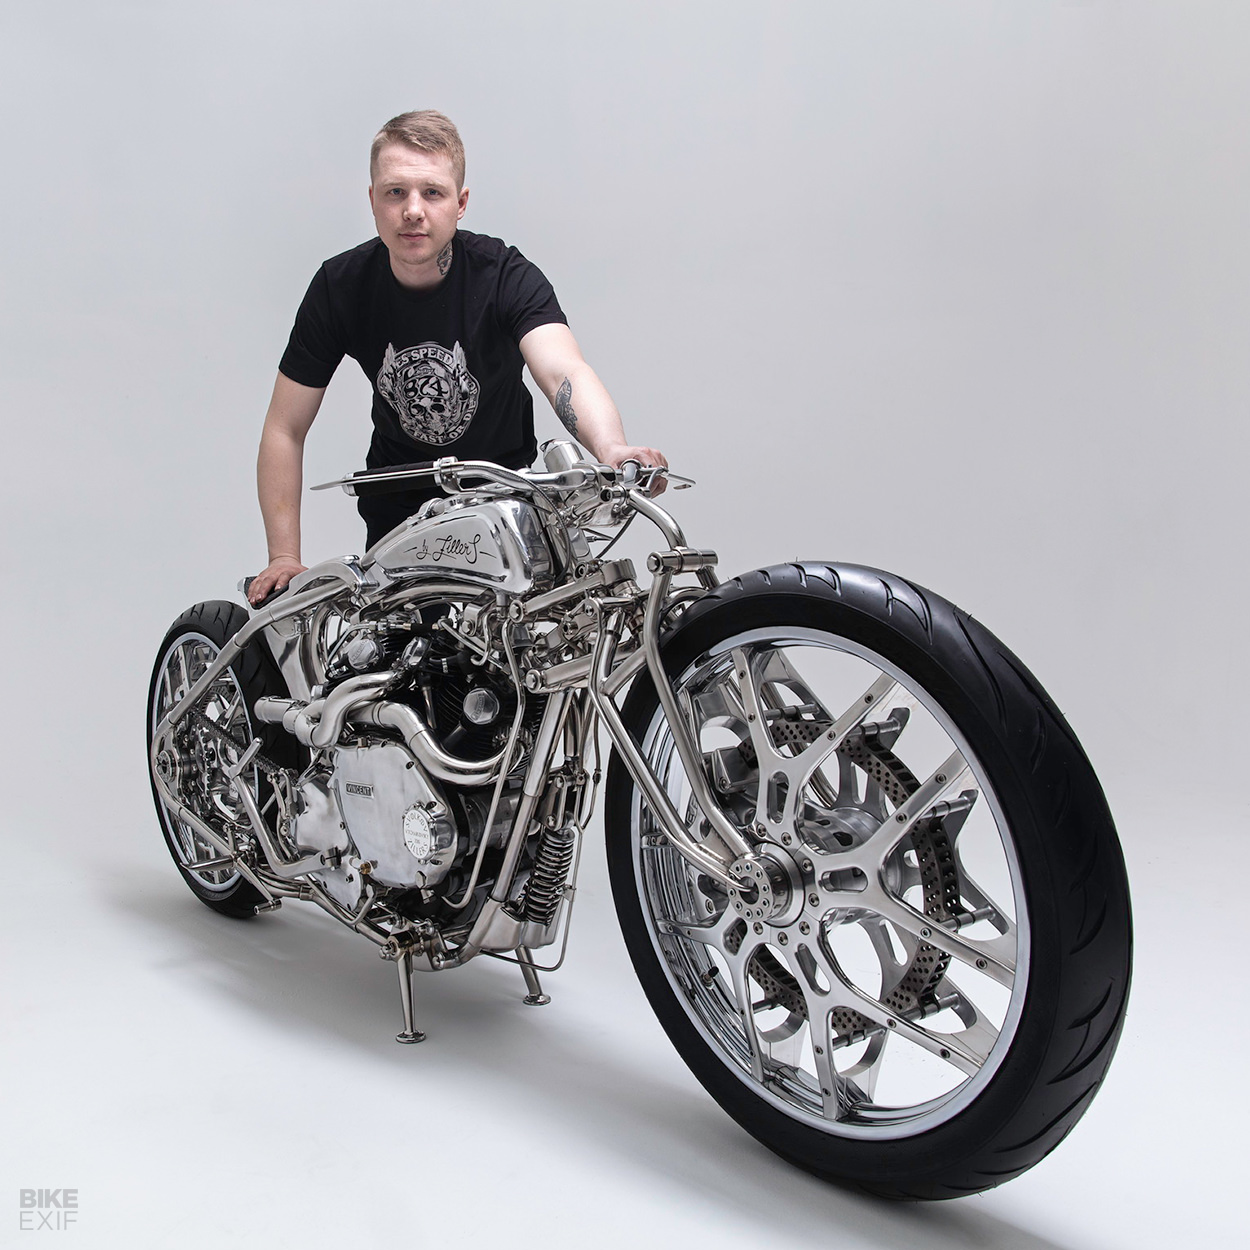 Custom Vincent Lightning by the Russian motorcycle builder Zillers Garage